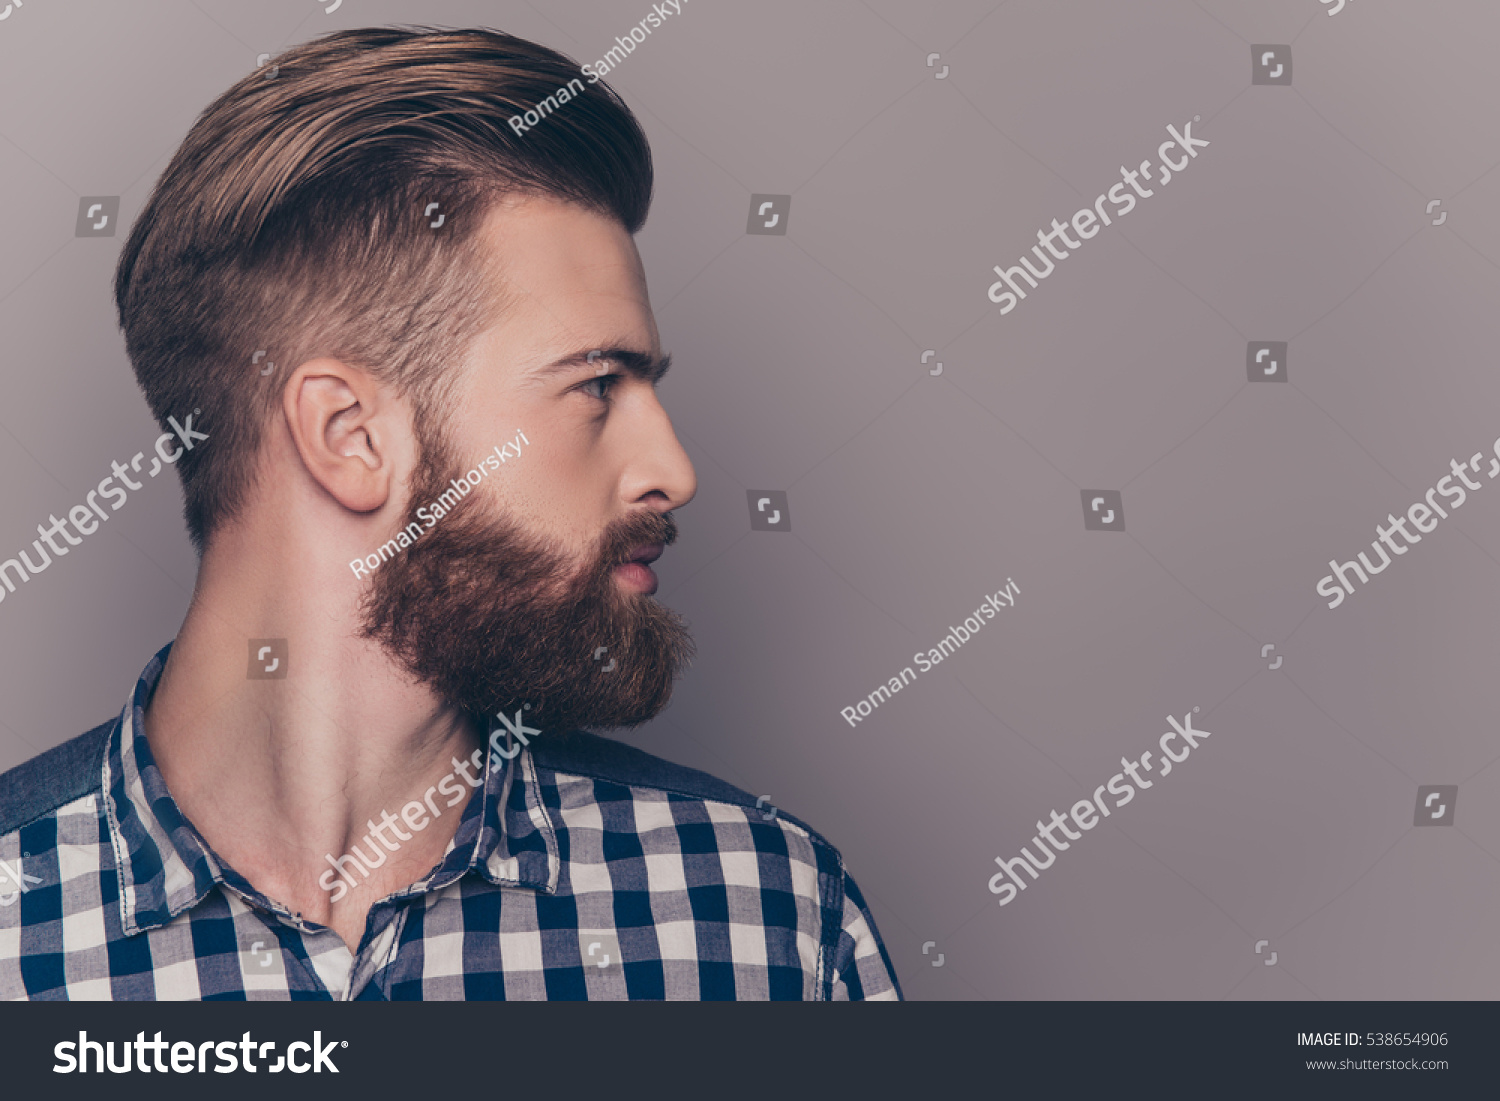 Side view portrait of thinking stylish young man looking away #538654906